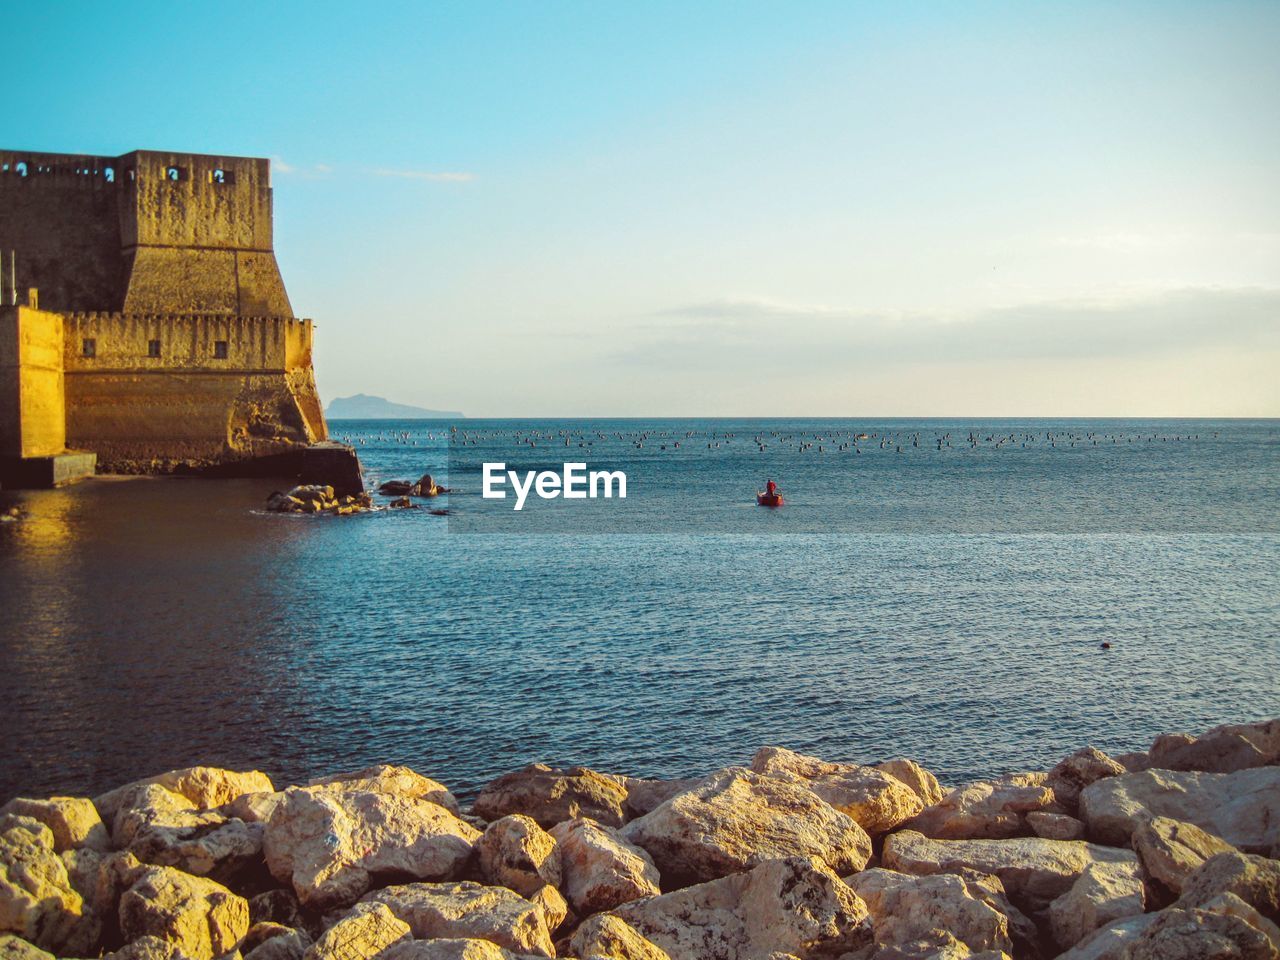 Castel dell ovo by sea against sky